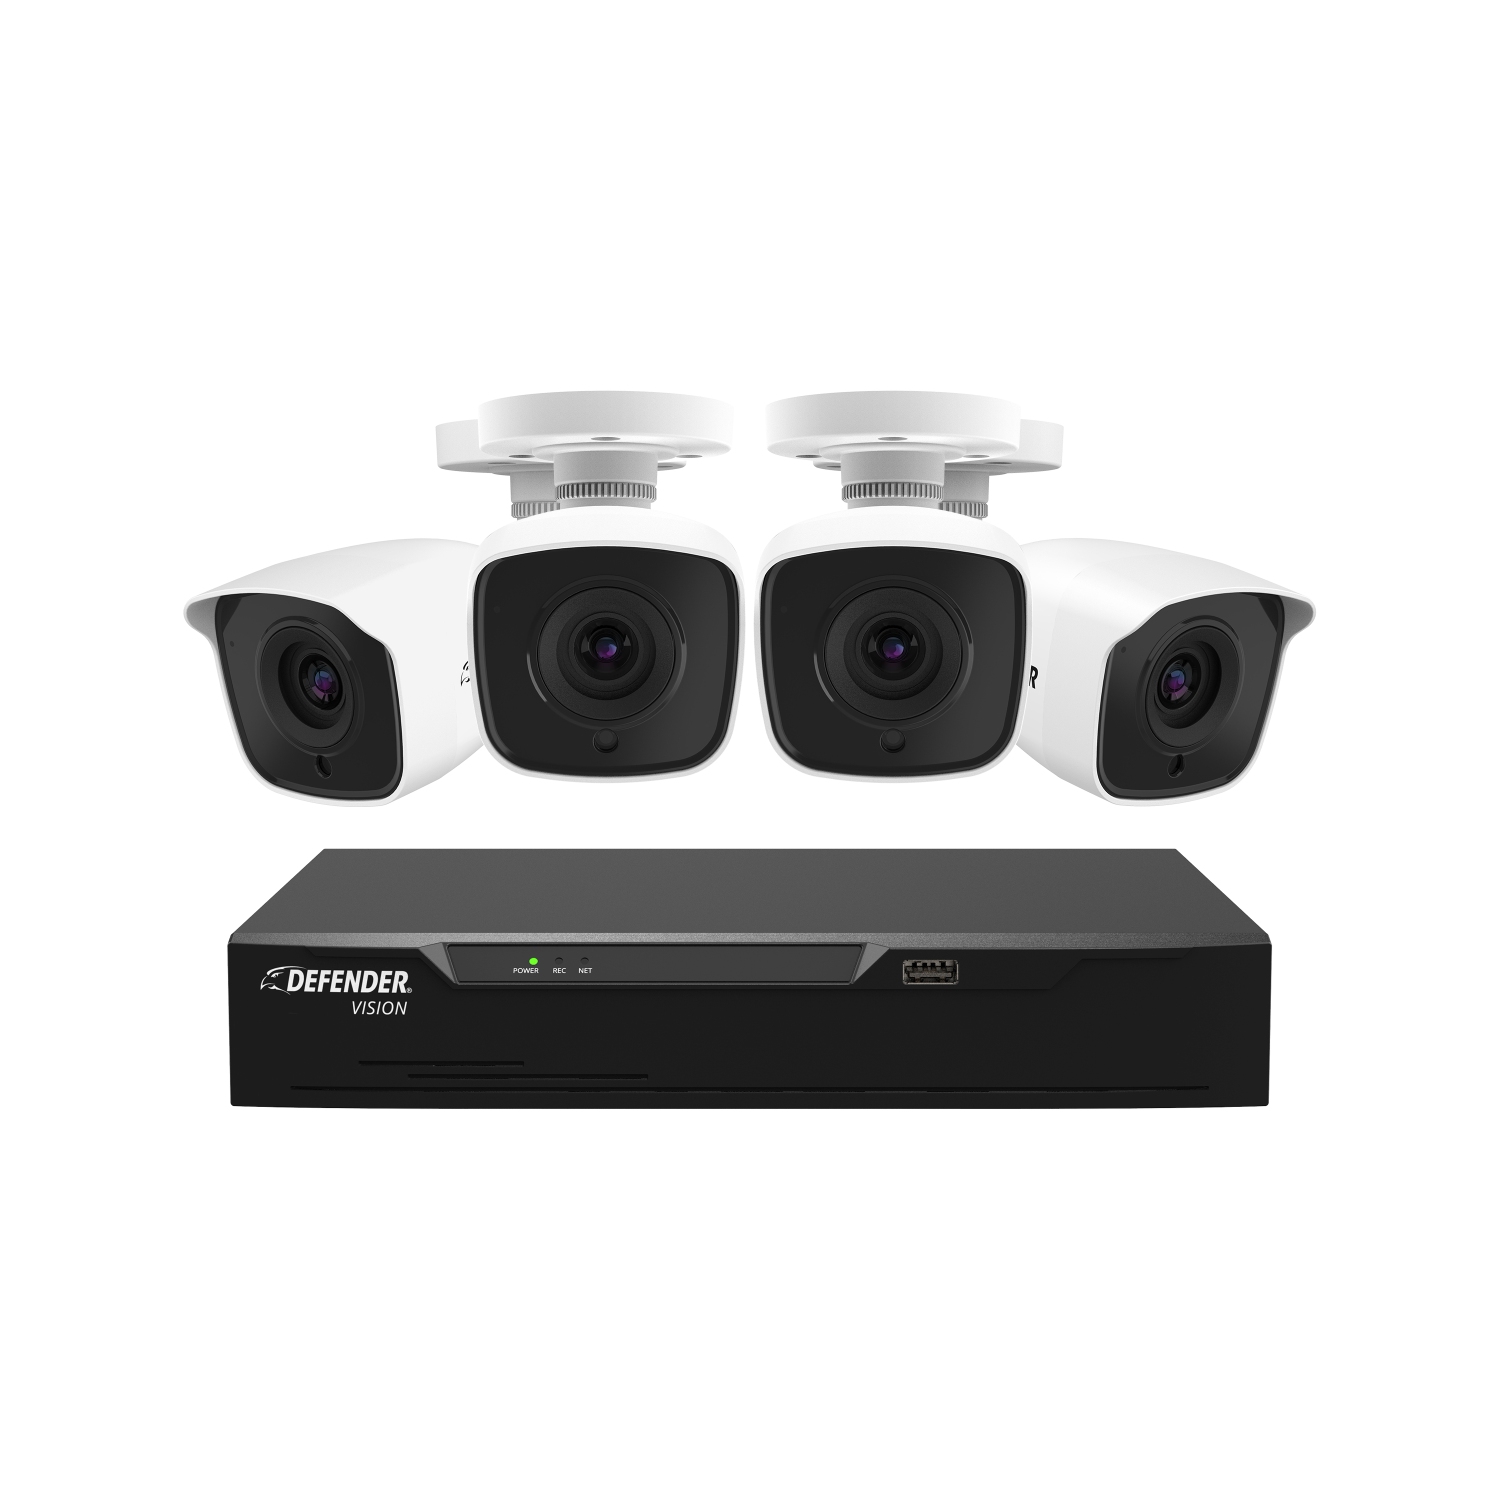 Defender Vision 4K Ultra-HD 1TB Wired Cameras for Home & Business Security , Indoor & Outdoor Surveillance Cameras, No Monthly Fees (4 Cameras)